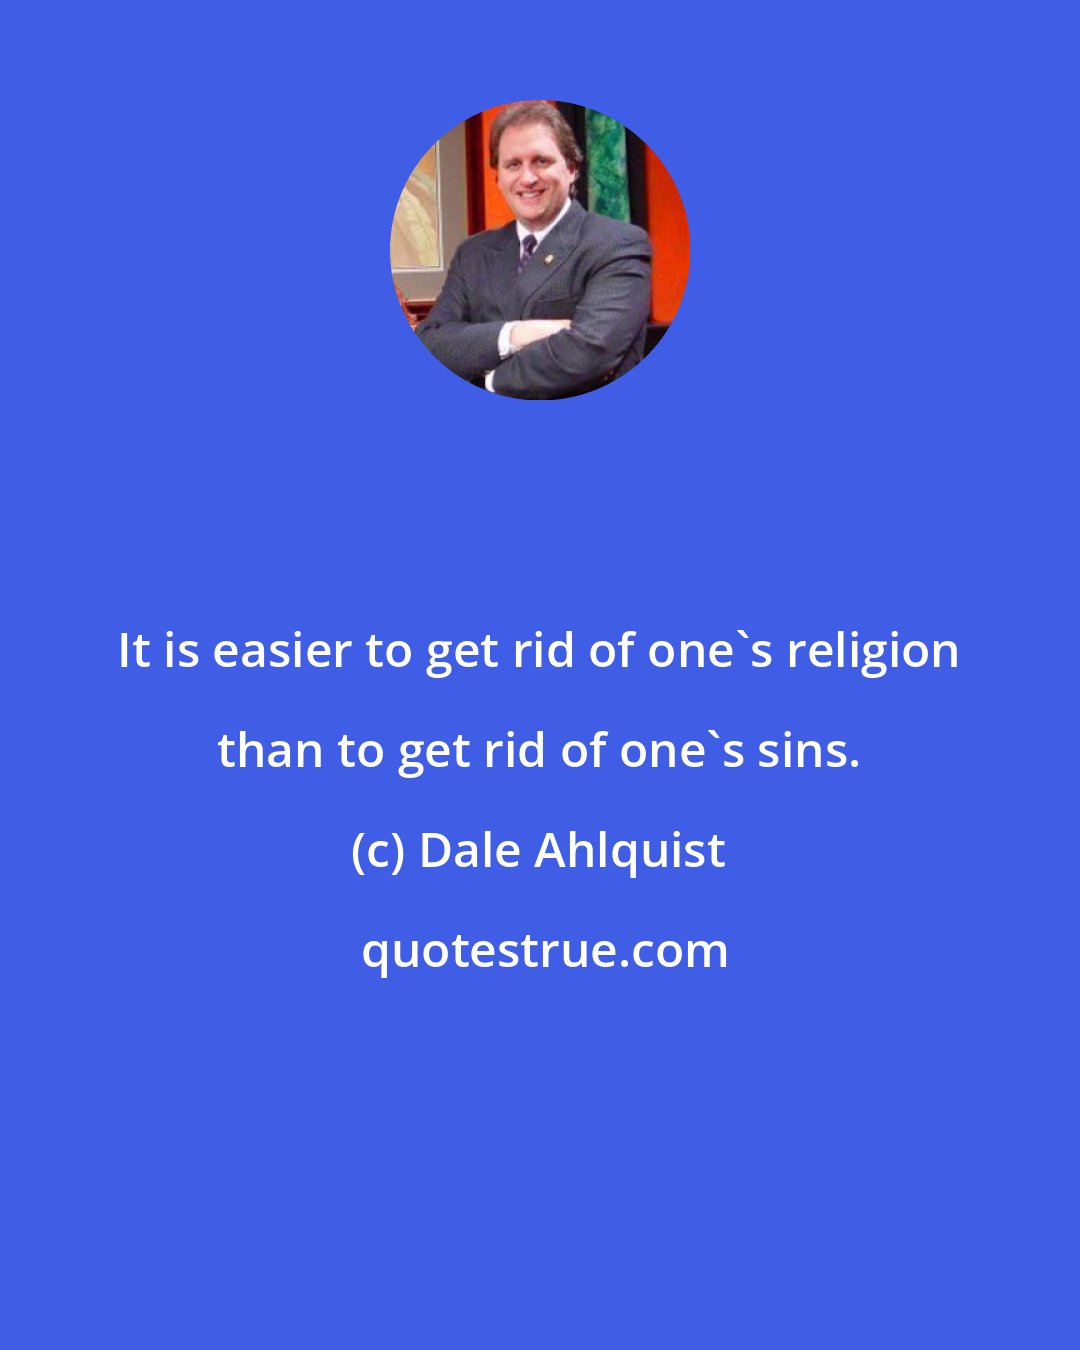 Dale Ahlquist: It is easier to get rid of one's religion than to get rid of one's sins.